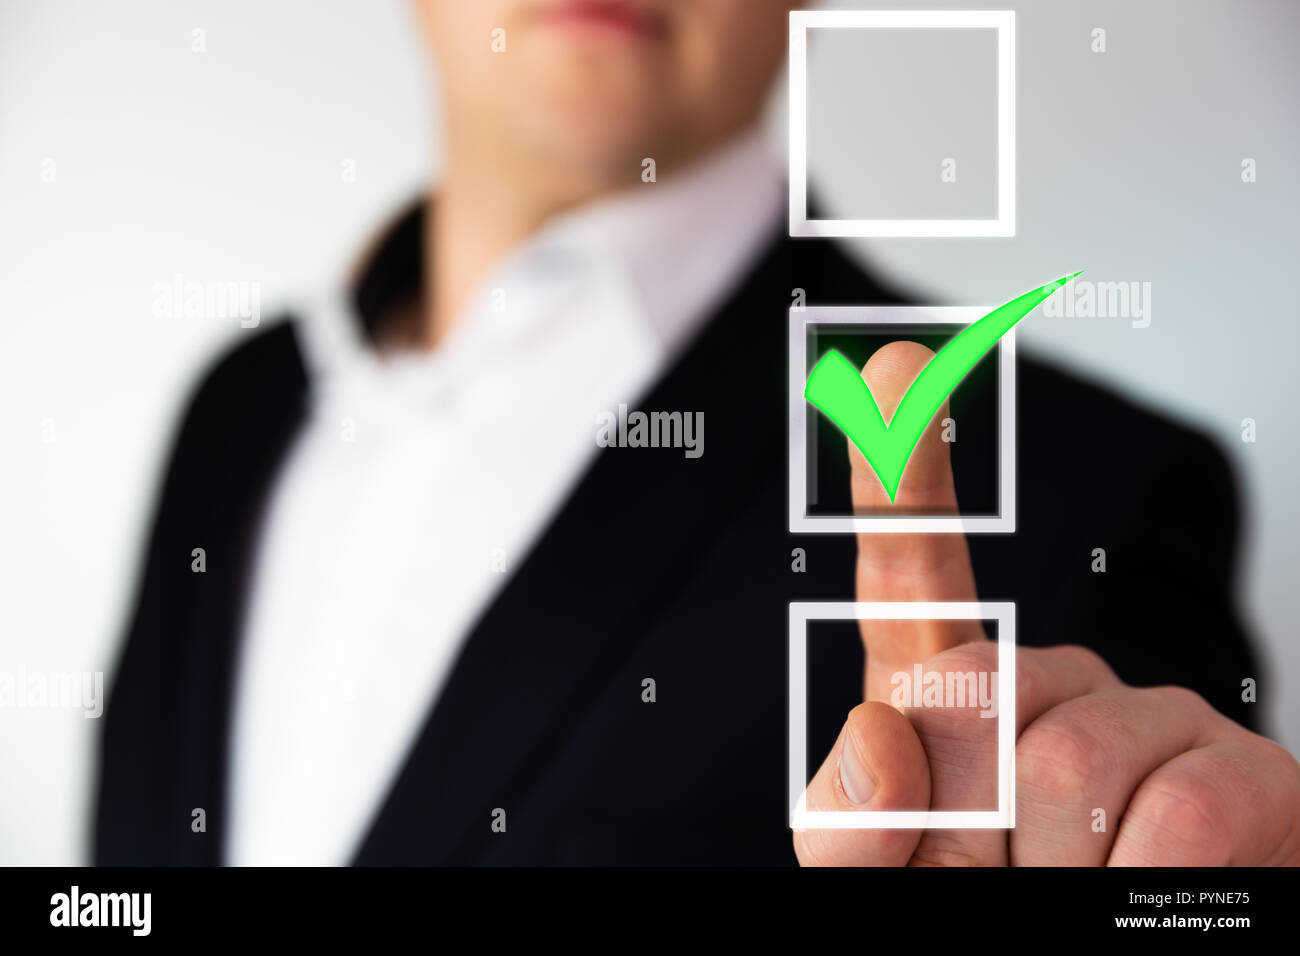 Businessman pushing checkbox button with a green tick. Stock Photo